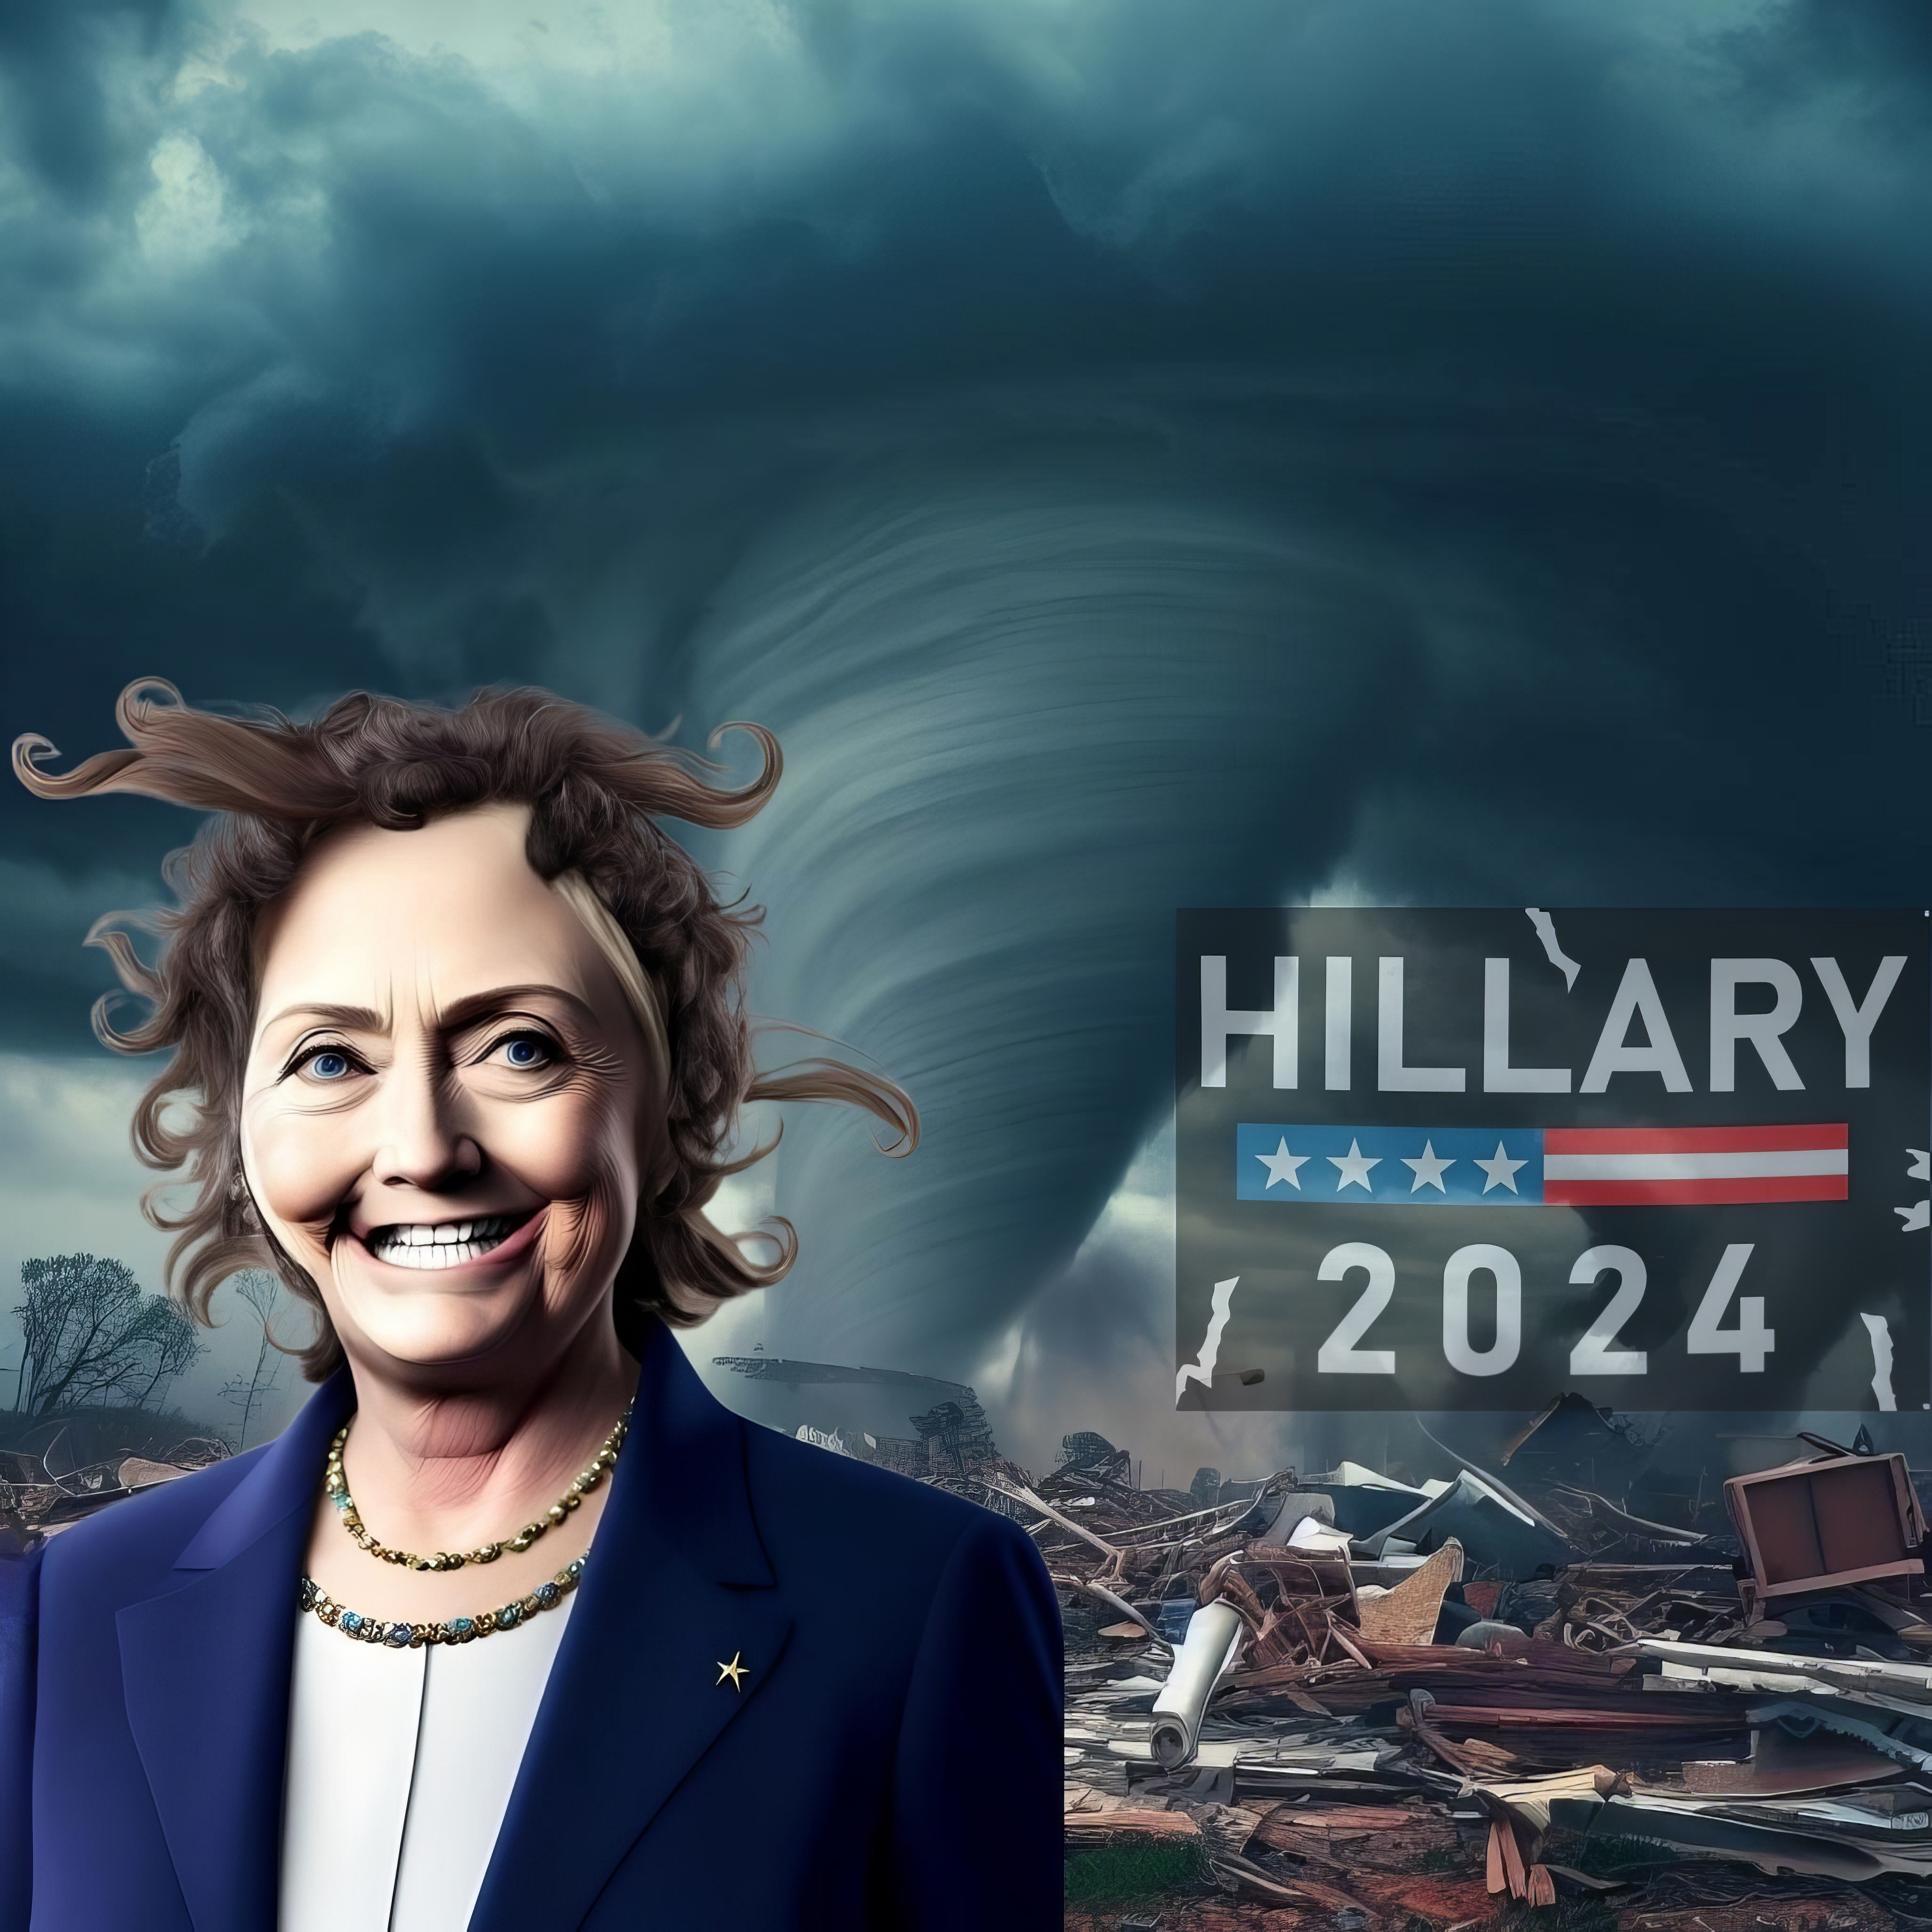 A 2024 Hillary Clinton presidential poster with hair disheveled from a hurricane in the background.